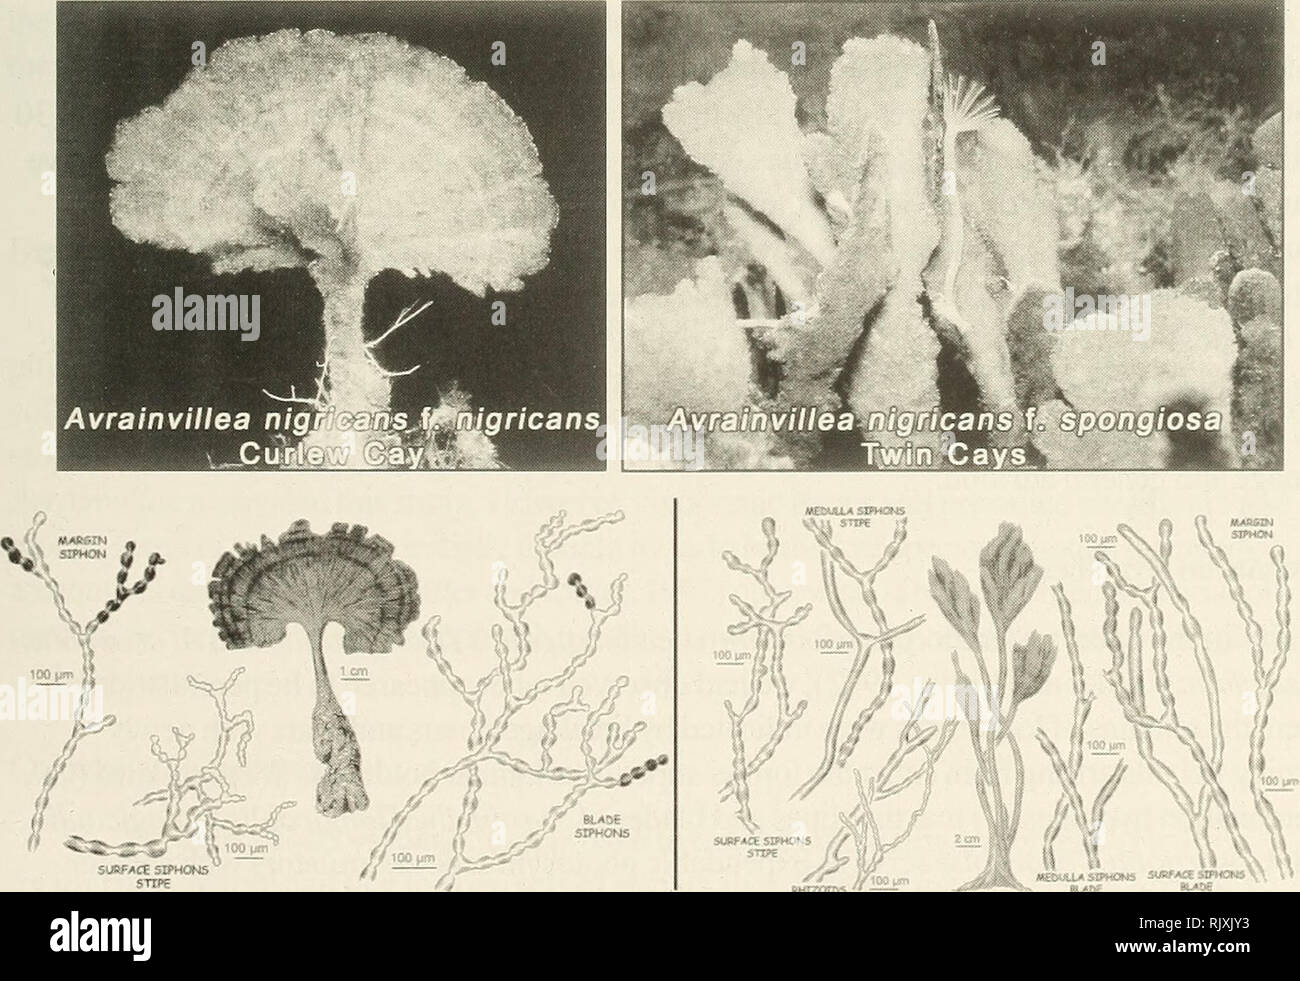 . Atoll research bulletin. Coral reefs and islands; Marine biology; Marine sciences. longicaulis f. longicaulis, A. asarifolia f. asarifolia and ,4. nigricans f. nigricans (Figs. 8,9,10) are typically anchored by a massive, perennating, bulbous, rhizoidal holdfast (Fig. 11) in open sandy or seagrass areas of shallow (to 30 m) pristine waters. As emphasized above, the discovery of incredible mound-building colonial morphs of Avrainvillea [A. longicaulis f. laxa (Fig. 8), A. asarifolia f. olivacea (Fig. 9) and,4. nigricans f. spongiosa (Fig. 10)] catalyzed this study. These three colossal mound- Stock Photo